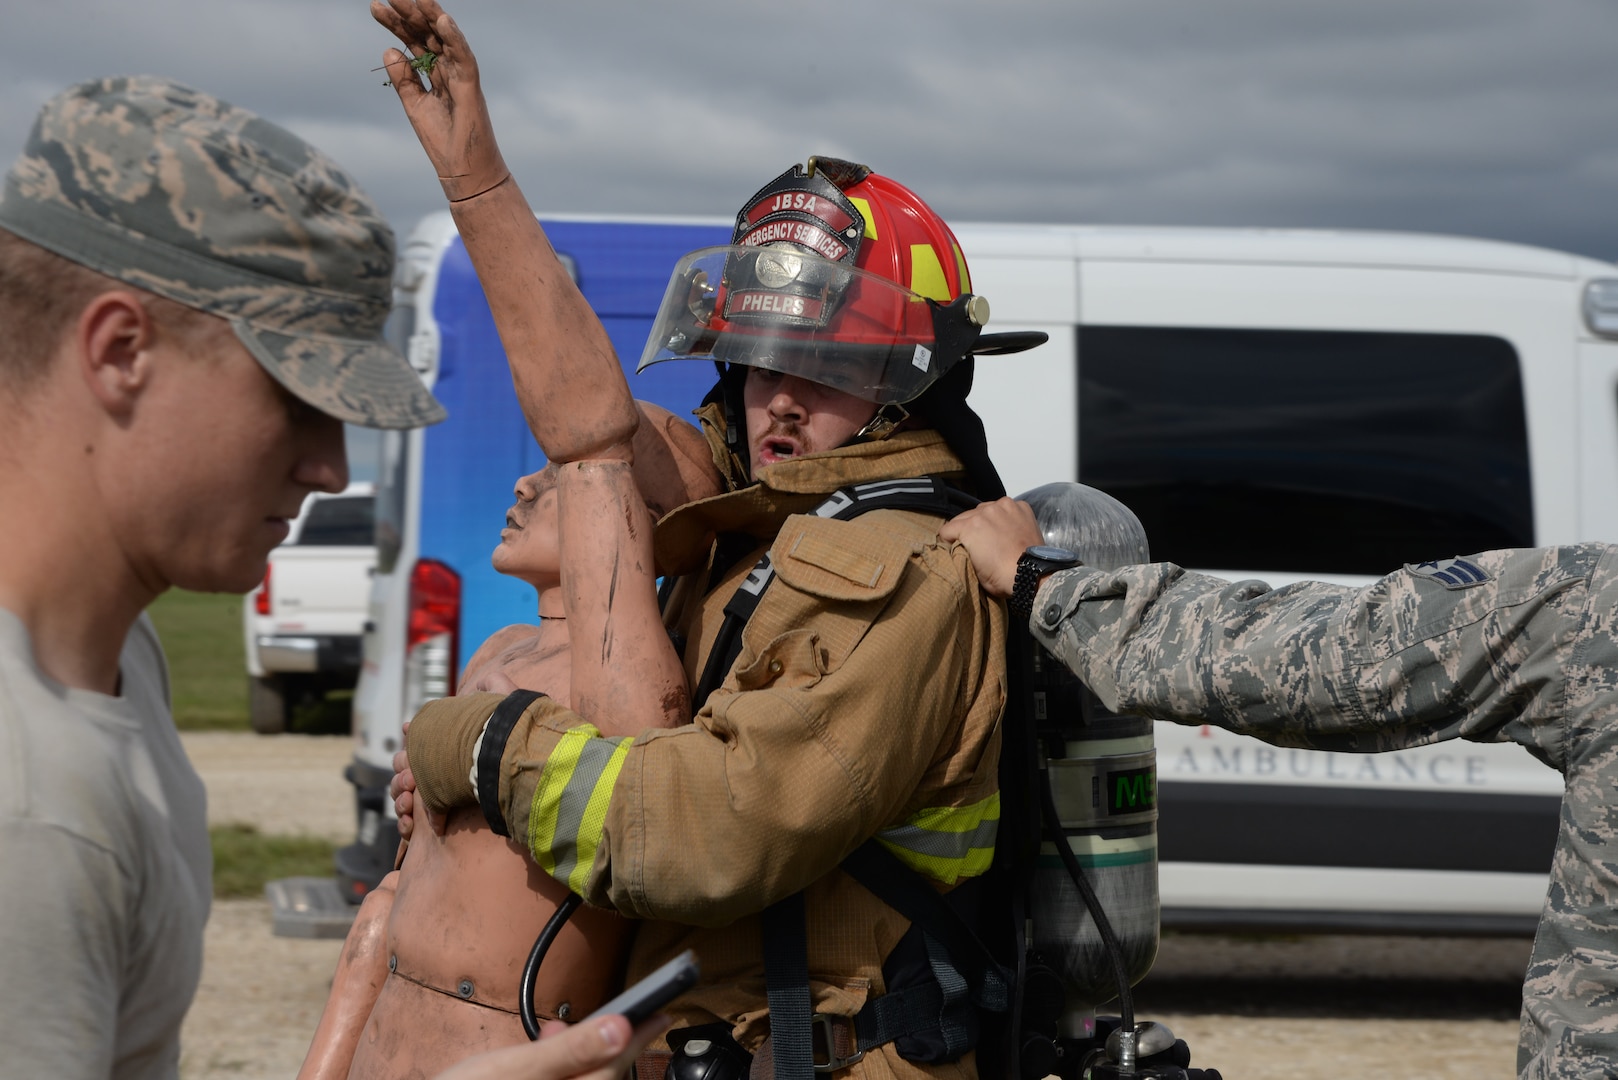 Senior Airman Patrick Sullivan, 902nd Security Forces Squadron, drags a dummy during the firefighter fitness challenge portion of the Battle of the Badges competition Oct. 20, 2018, at Joint Base San Antonio-Randolph’s Camp Talon. The initiative was designed to build stronger bonds between the agencies and has become a tradition for the unit members, their families and friends.